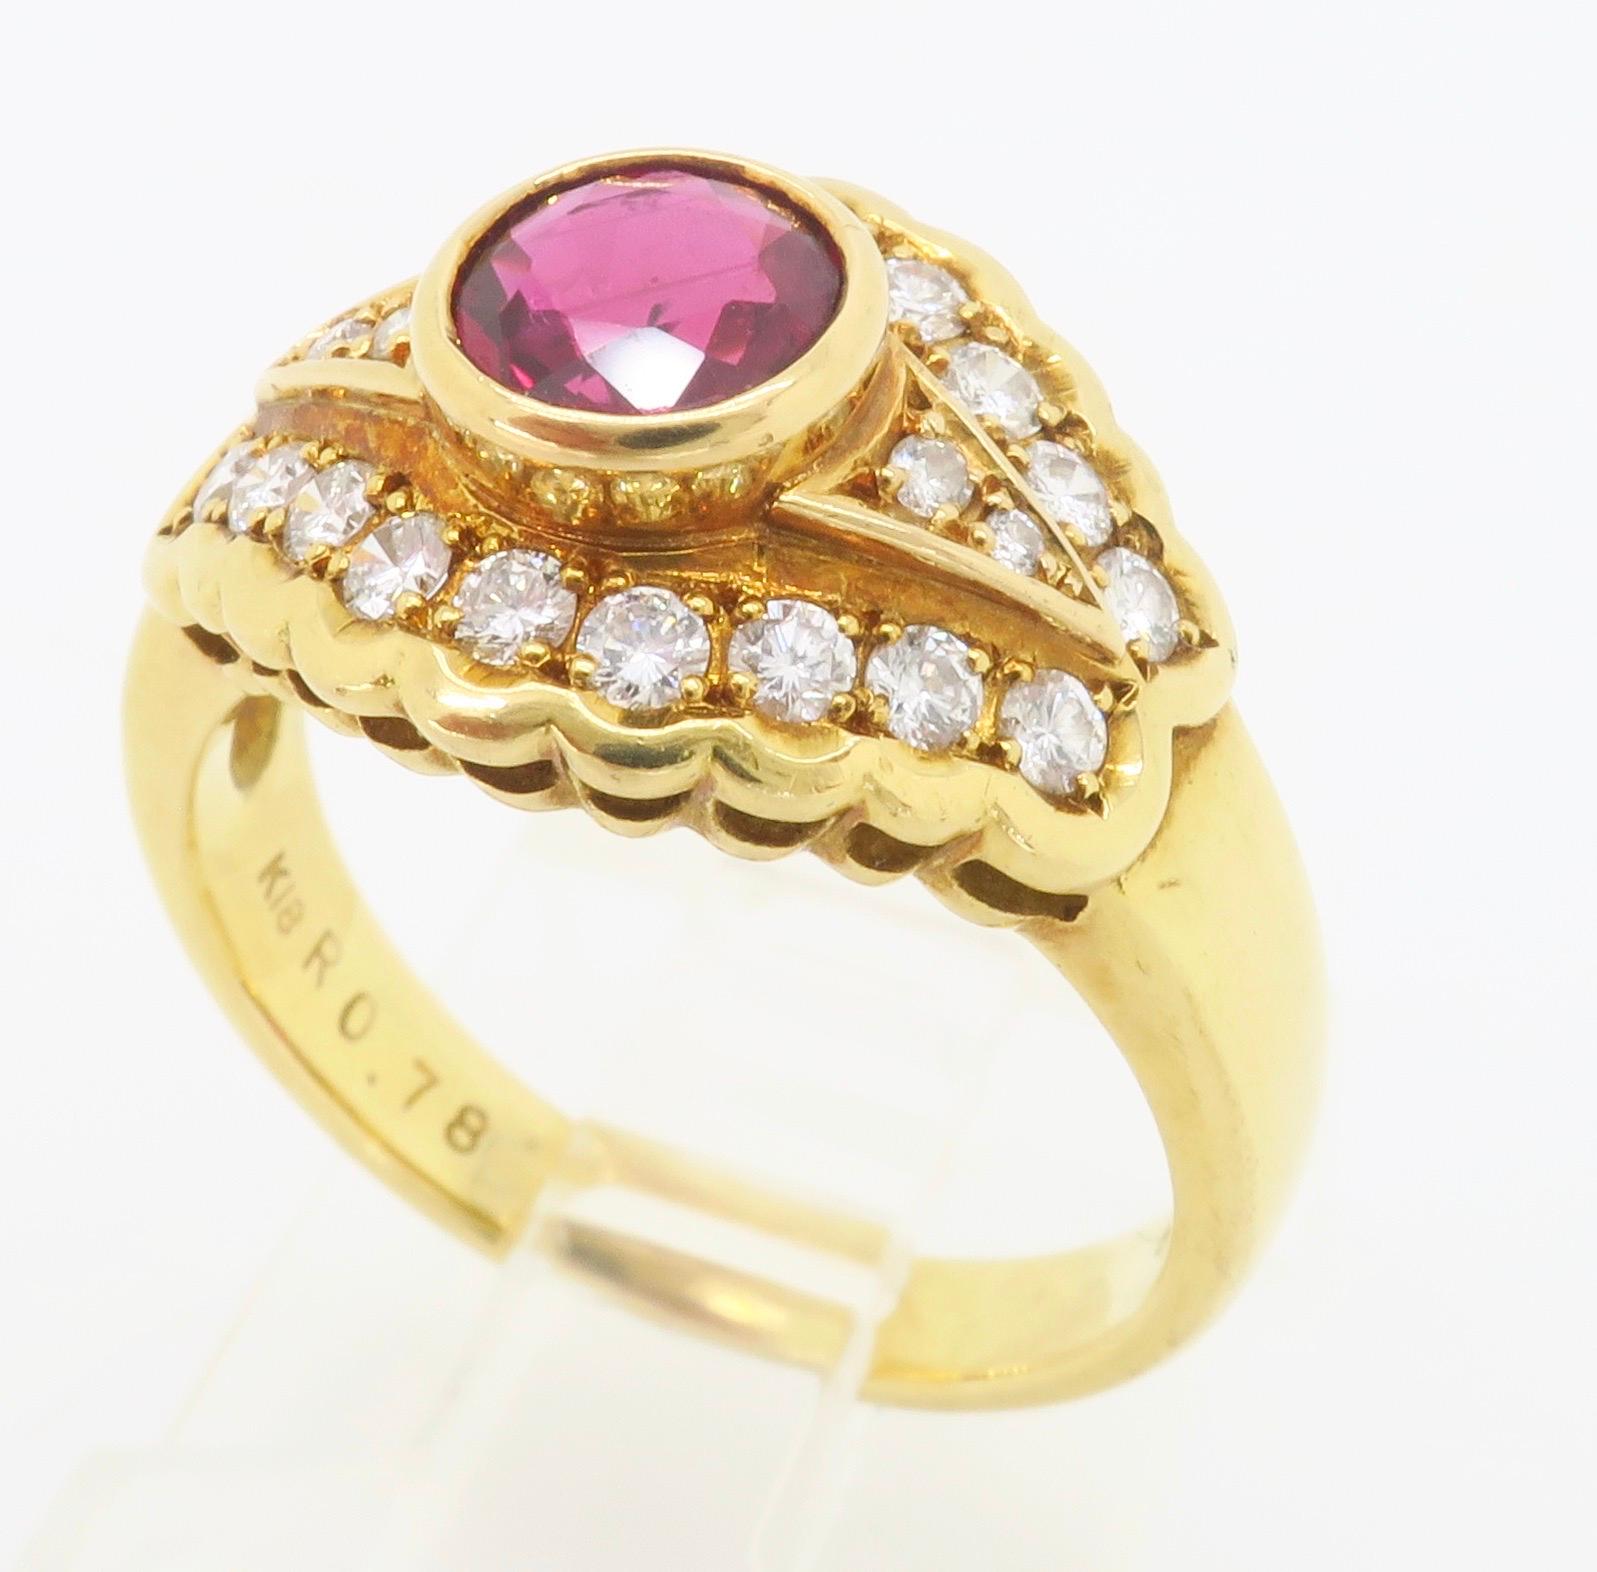 Ruby & Diamond Ring Made in 18k Yellow Gold 4